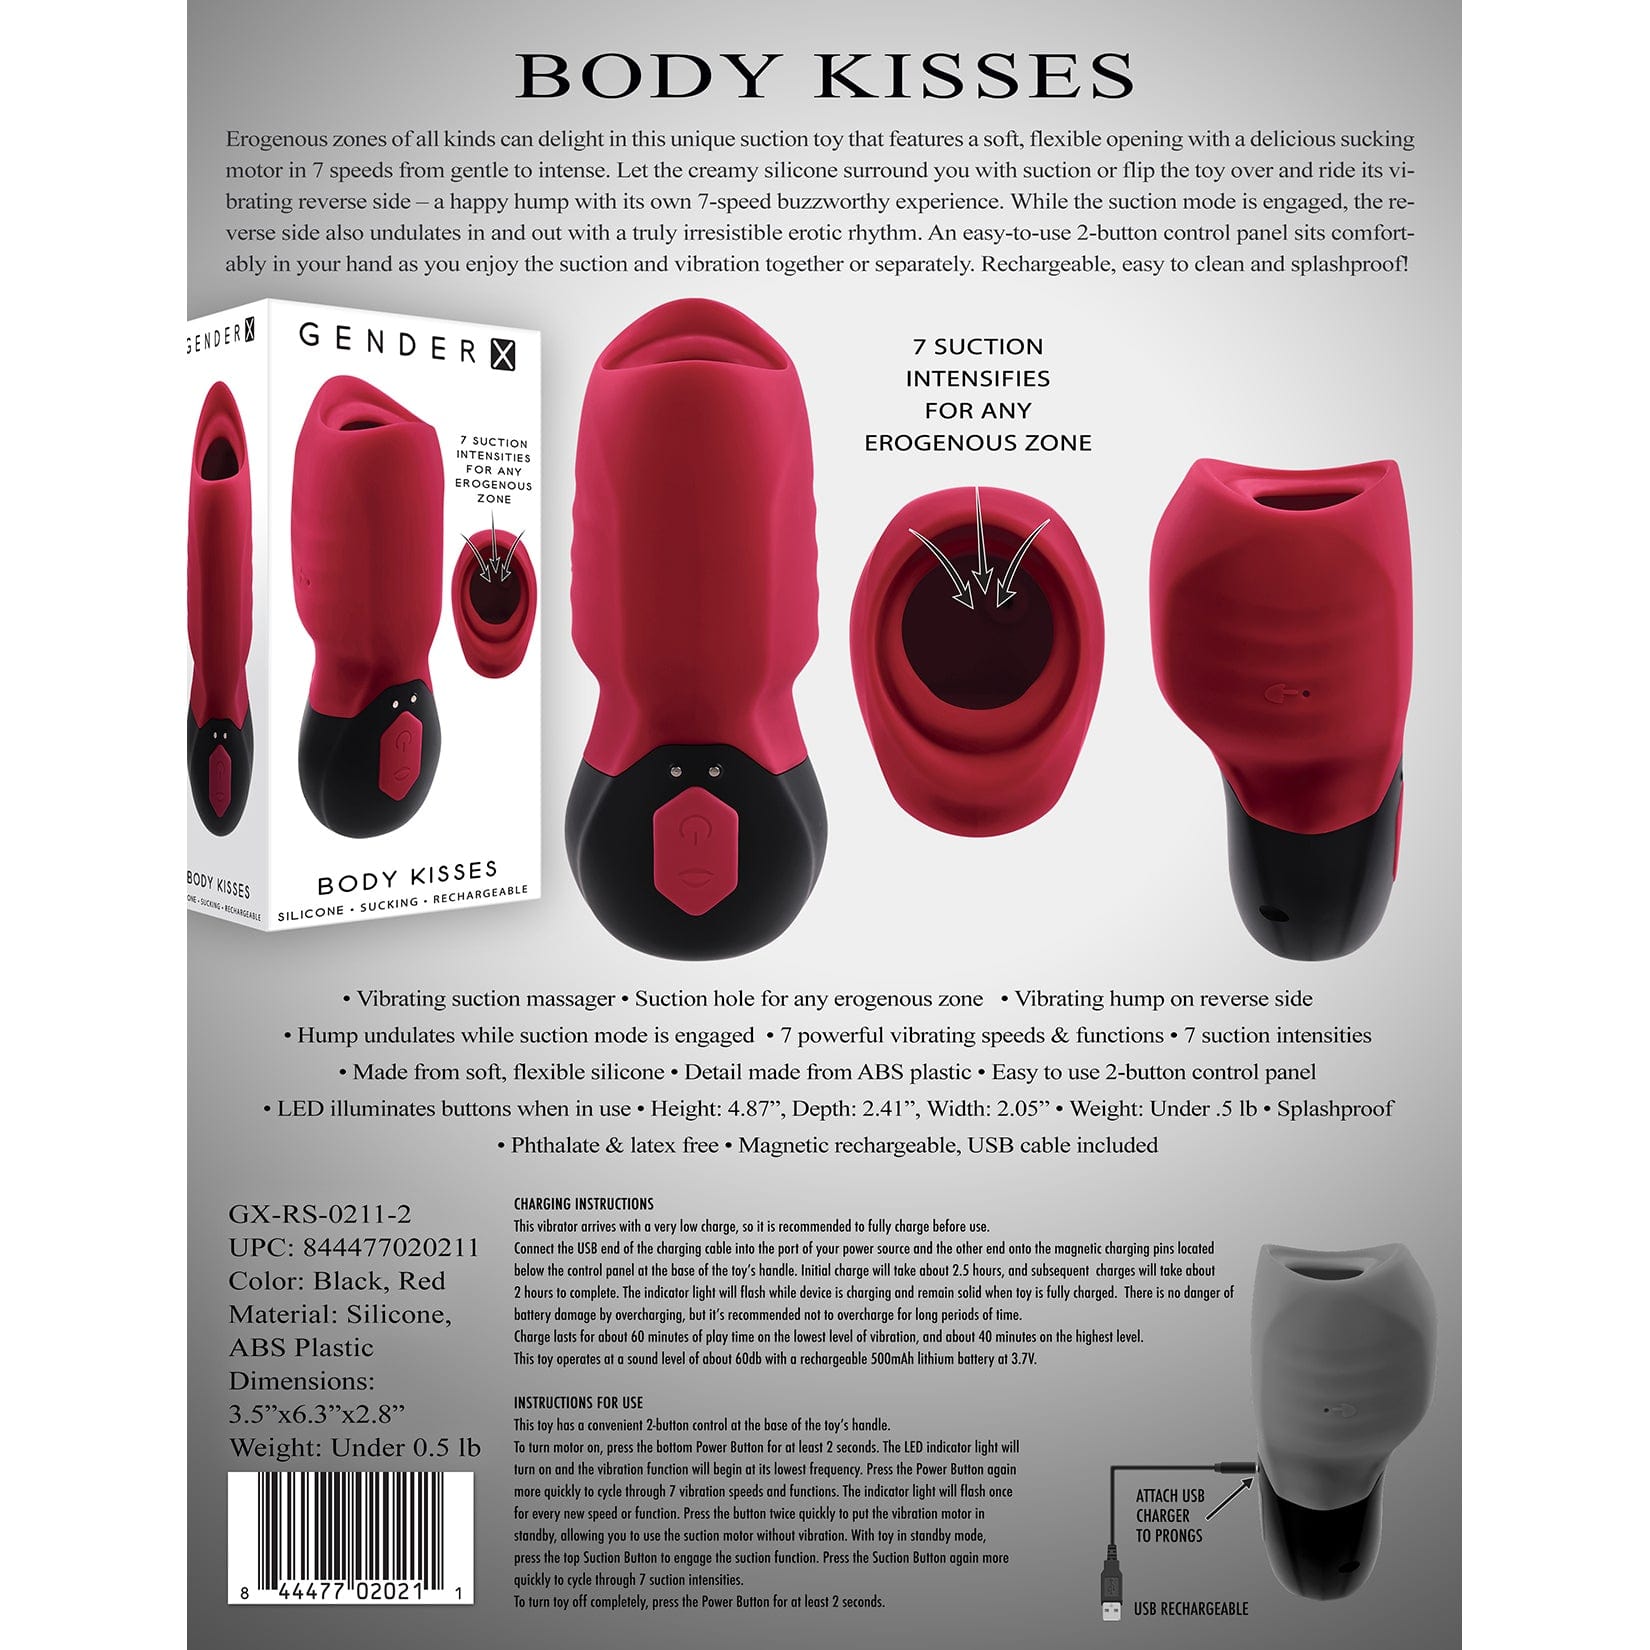 Evolved - Gender X Body Kisses Clit Massager (Red) Clit Massager (Vibration) Rechargeable 844477020211 CherryAffairs